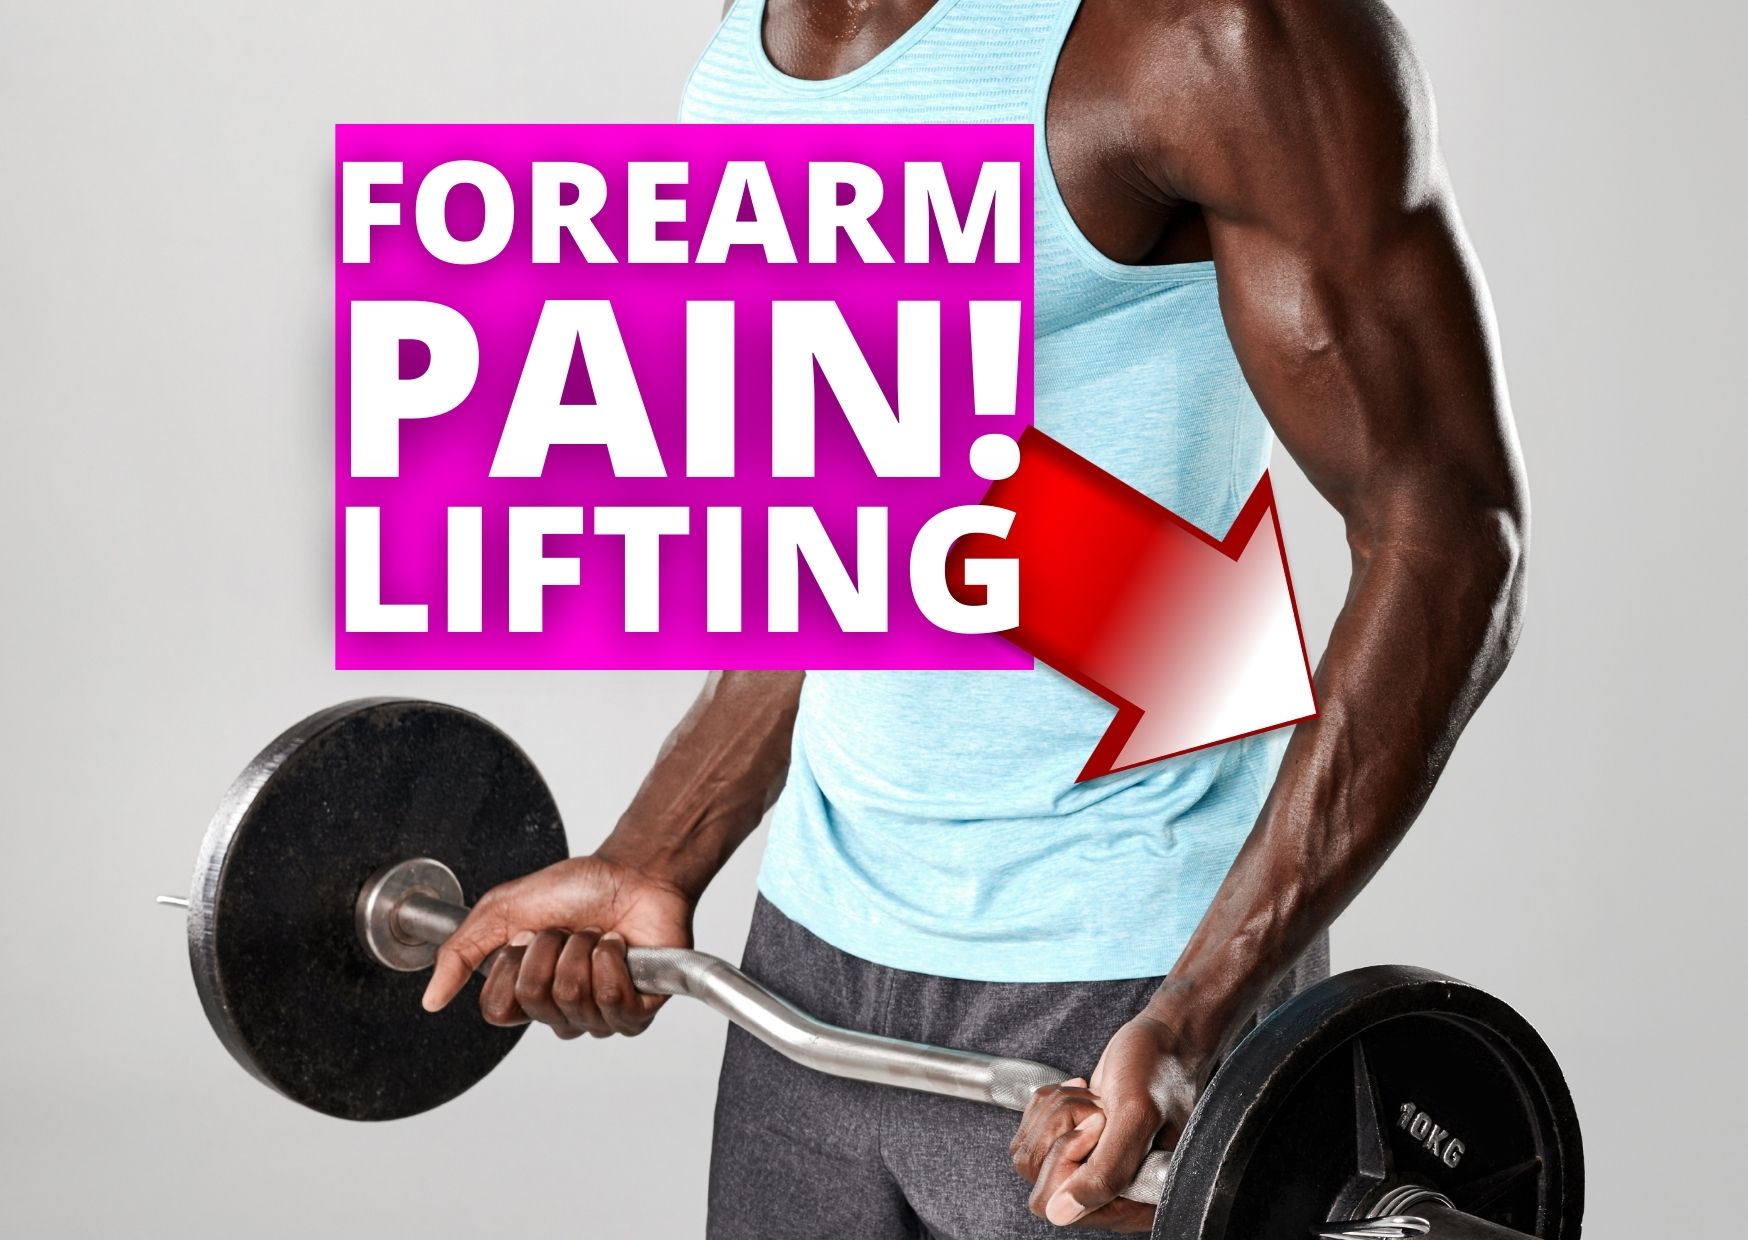 Forearm pain when lifting